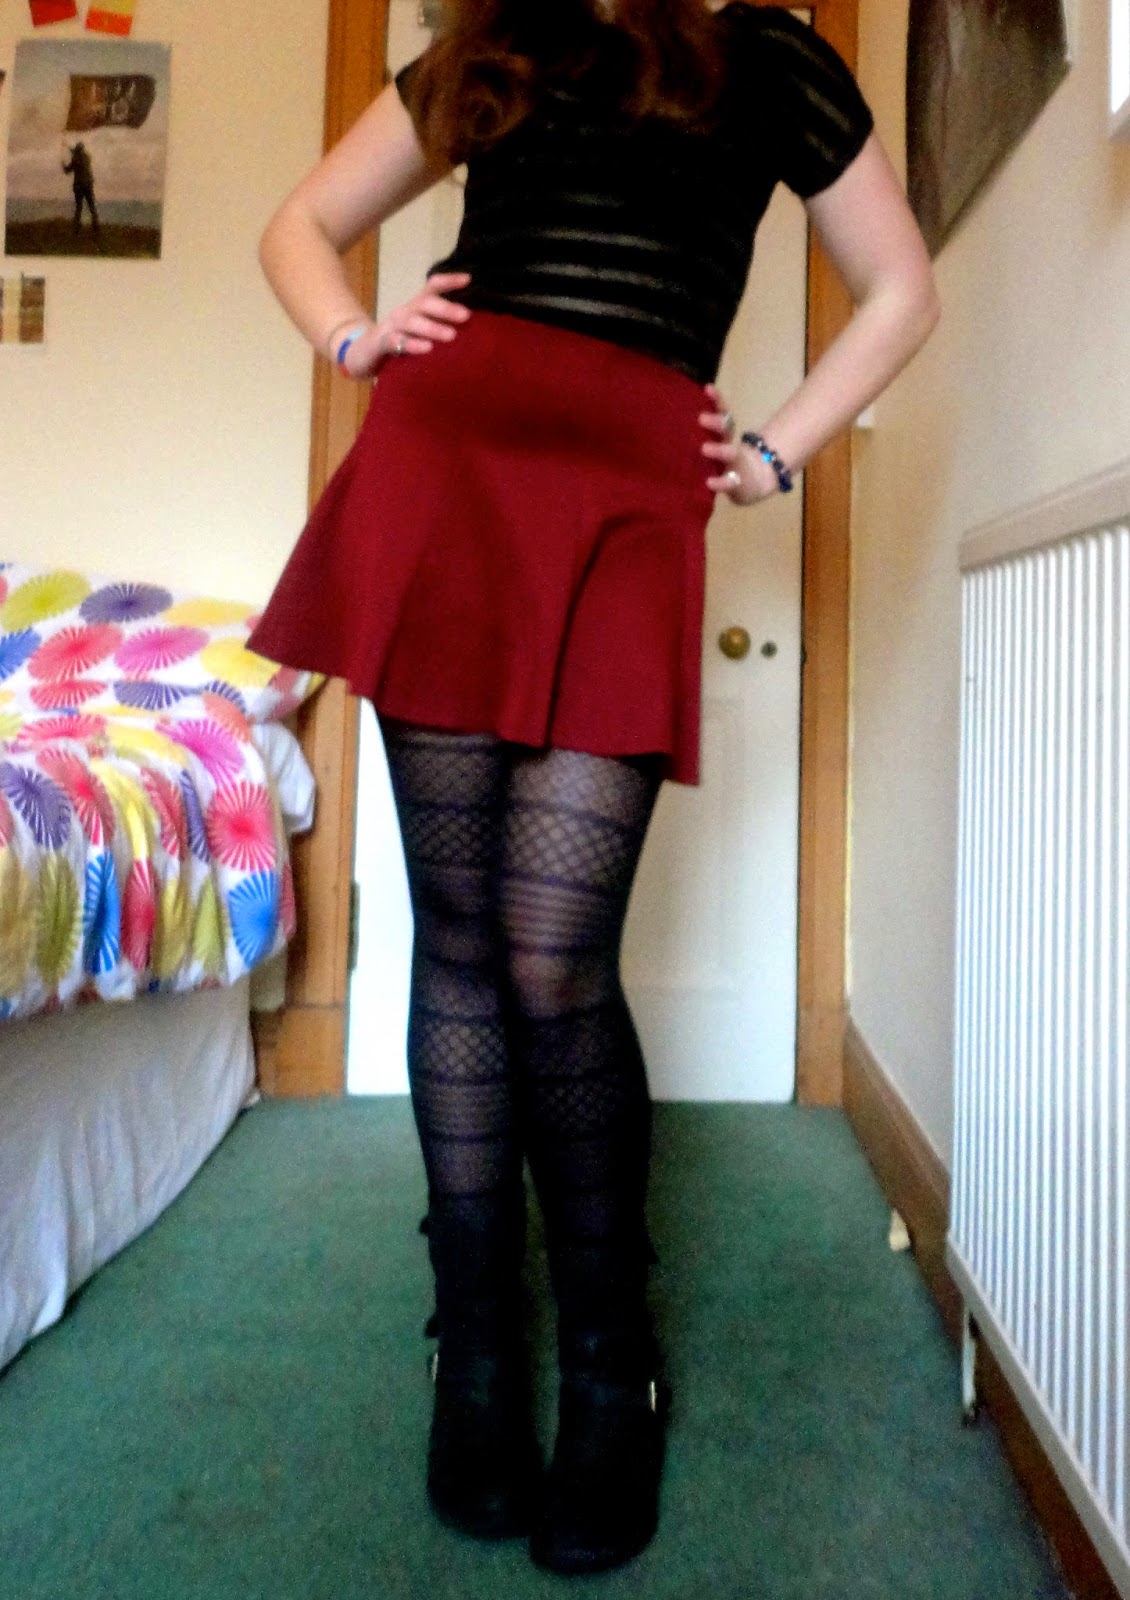 Outfit of black striped top, red skirt, patterned tights and black boots